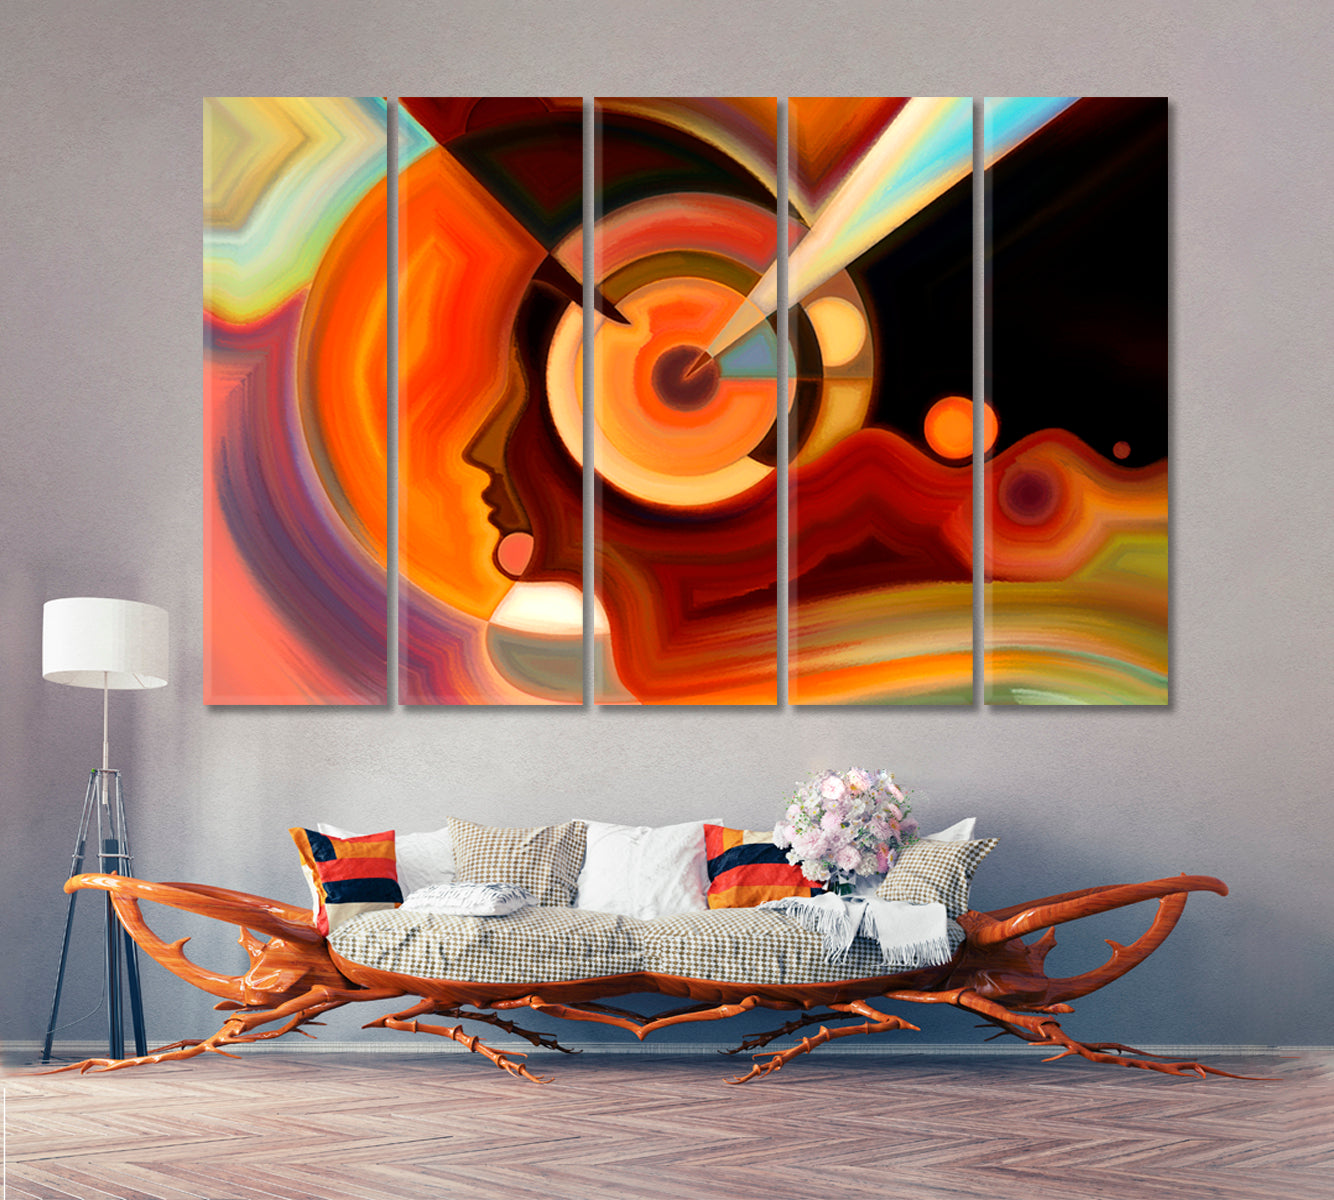 Colors in Mind Artistic Abstract Design Contemporary Art Artesty 5 panels 36" x 24" 